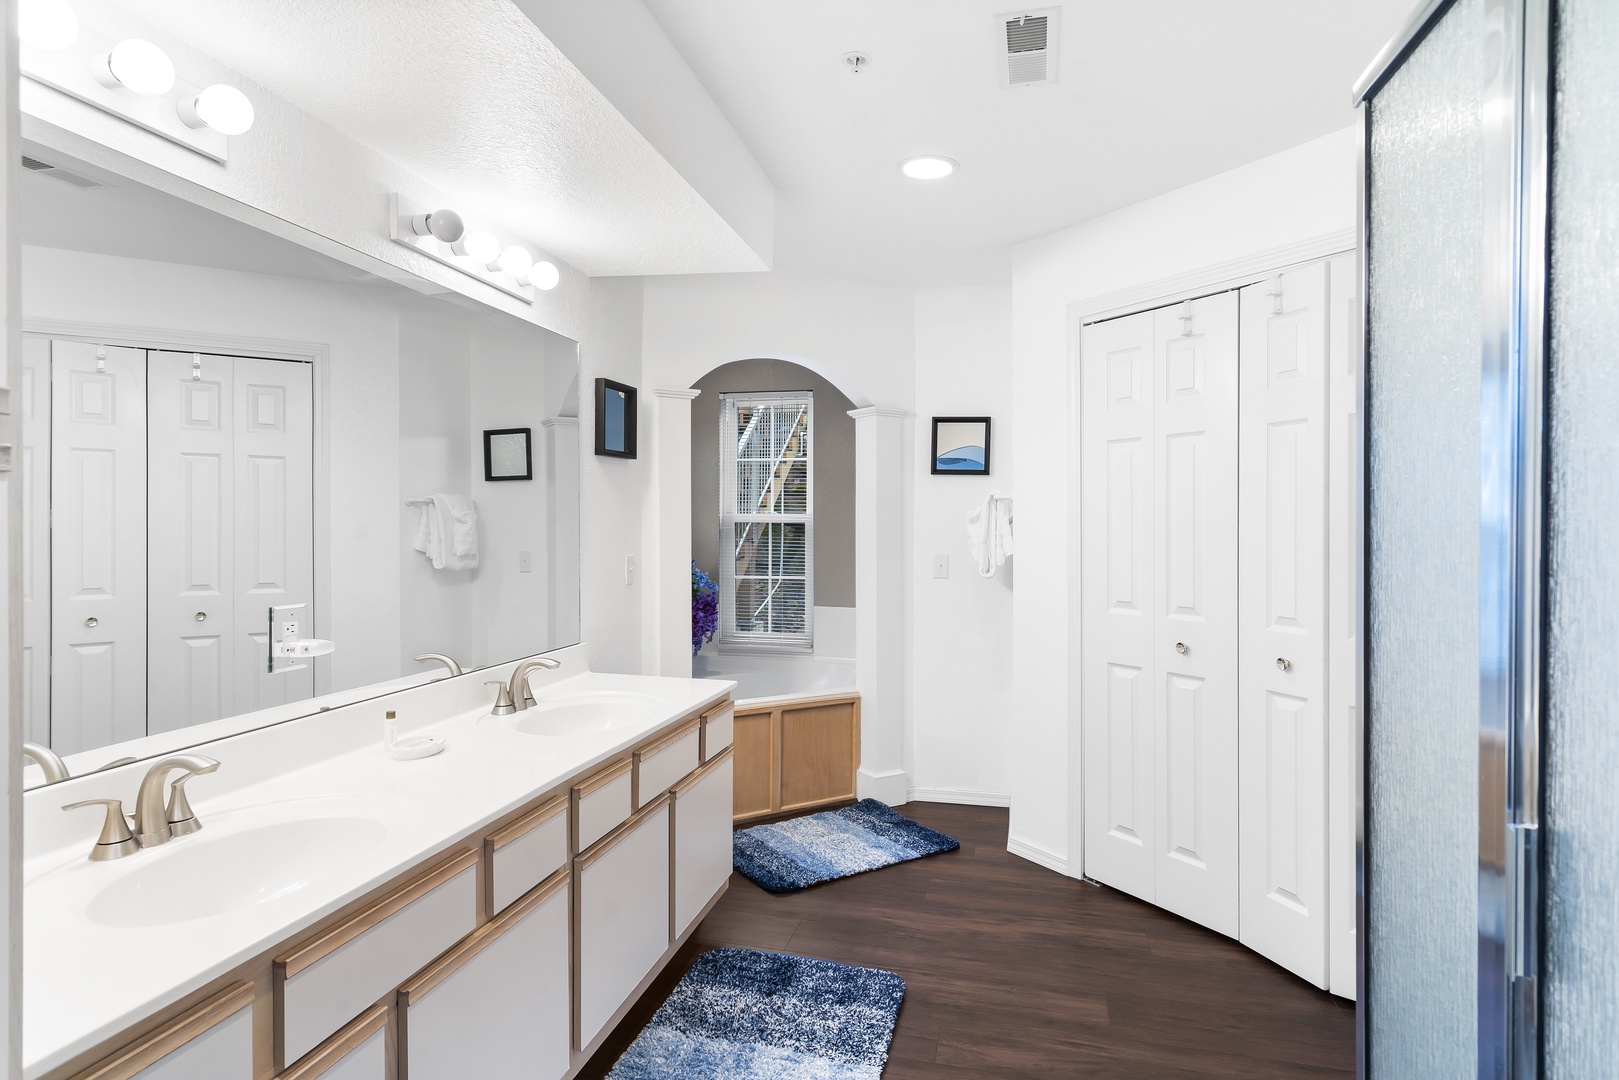 This luxe ensuite features a double vanity, glass shower, & soaking tub